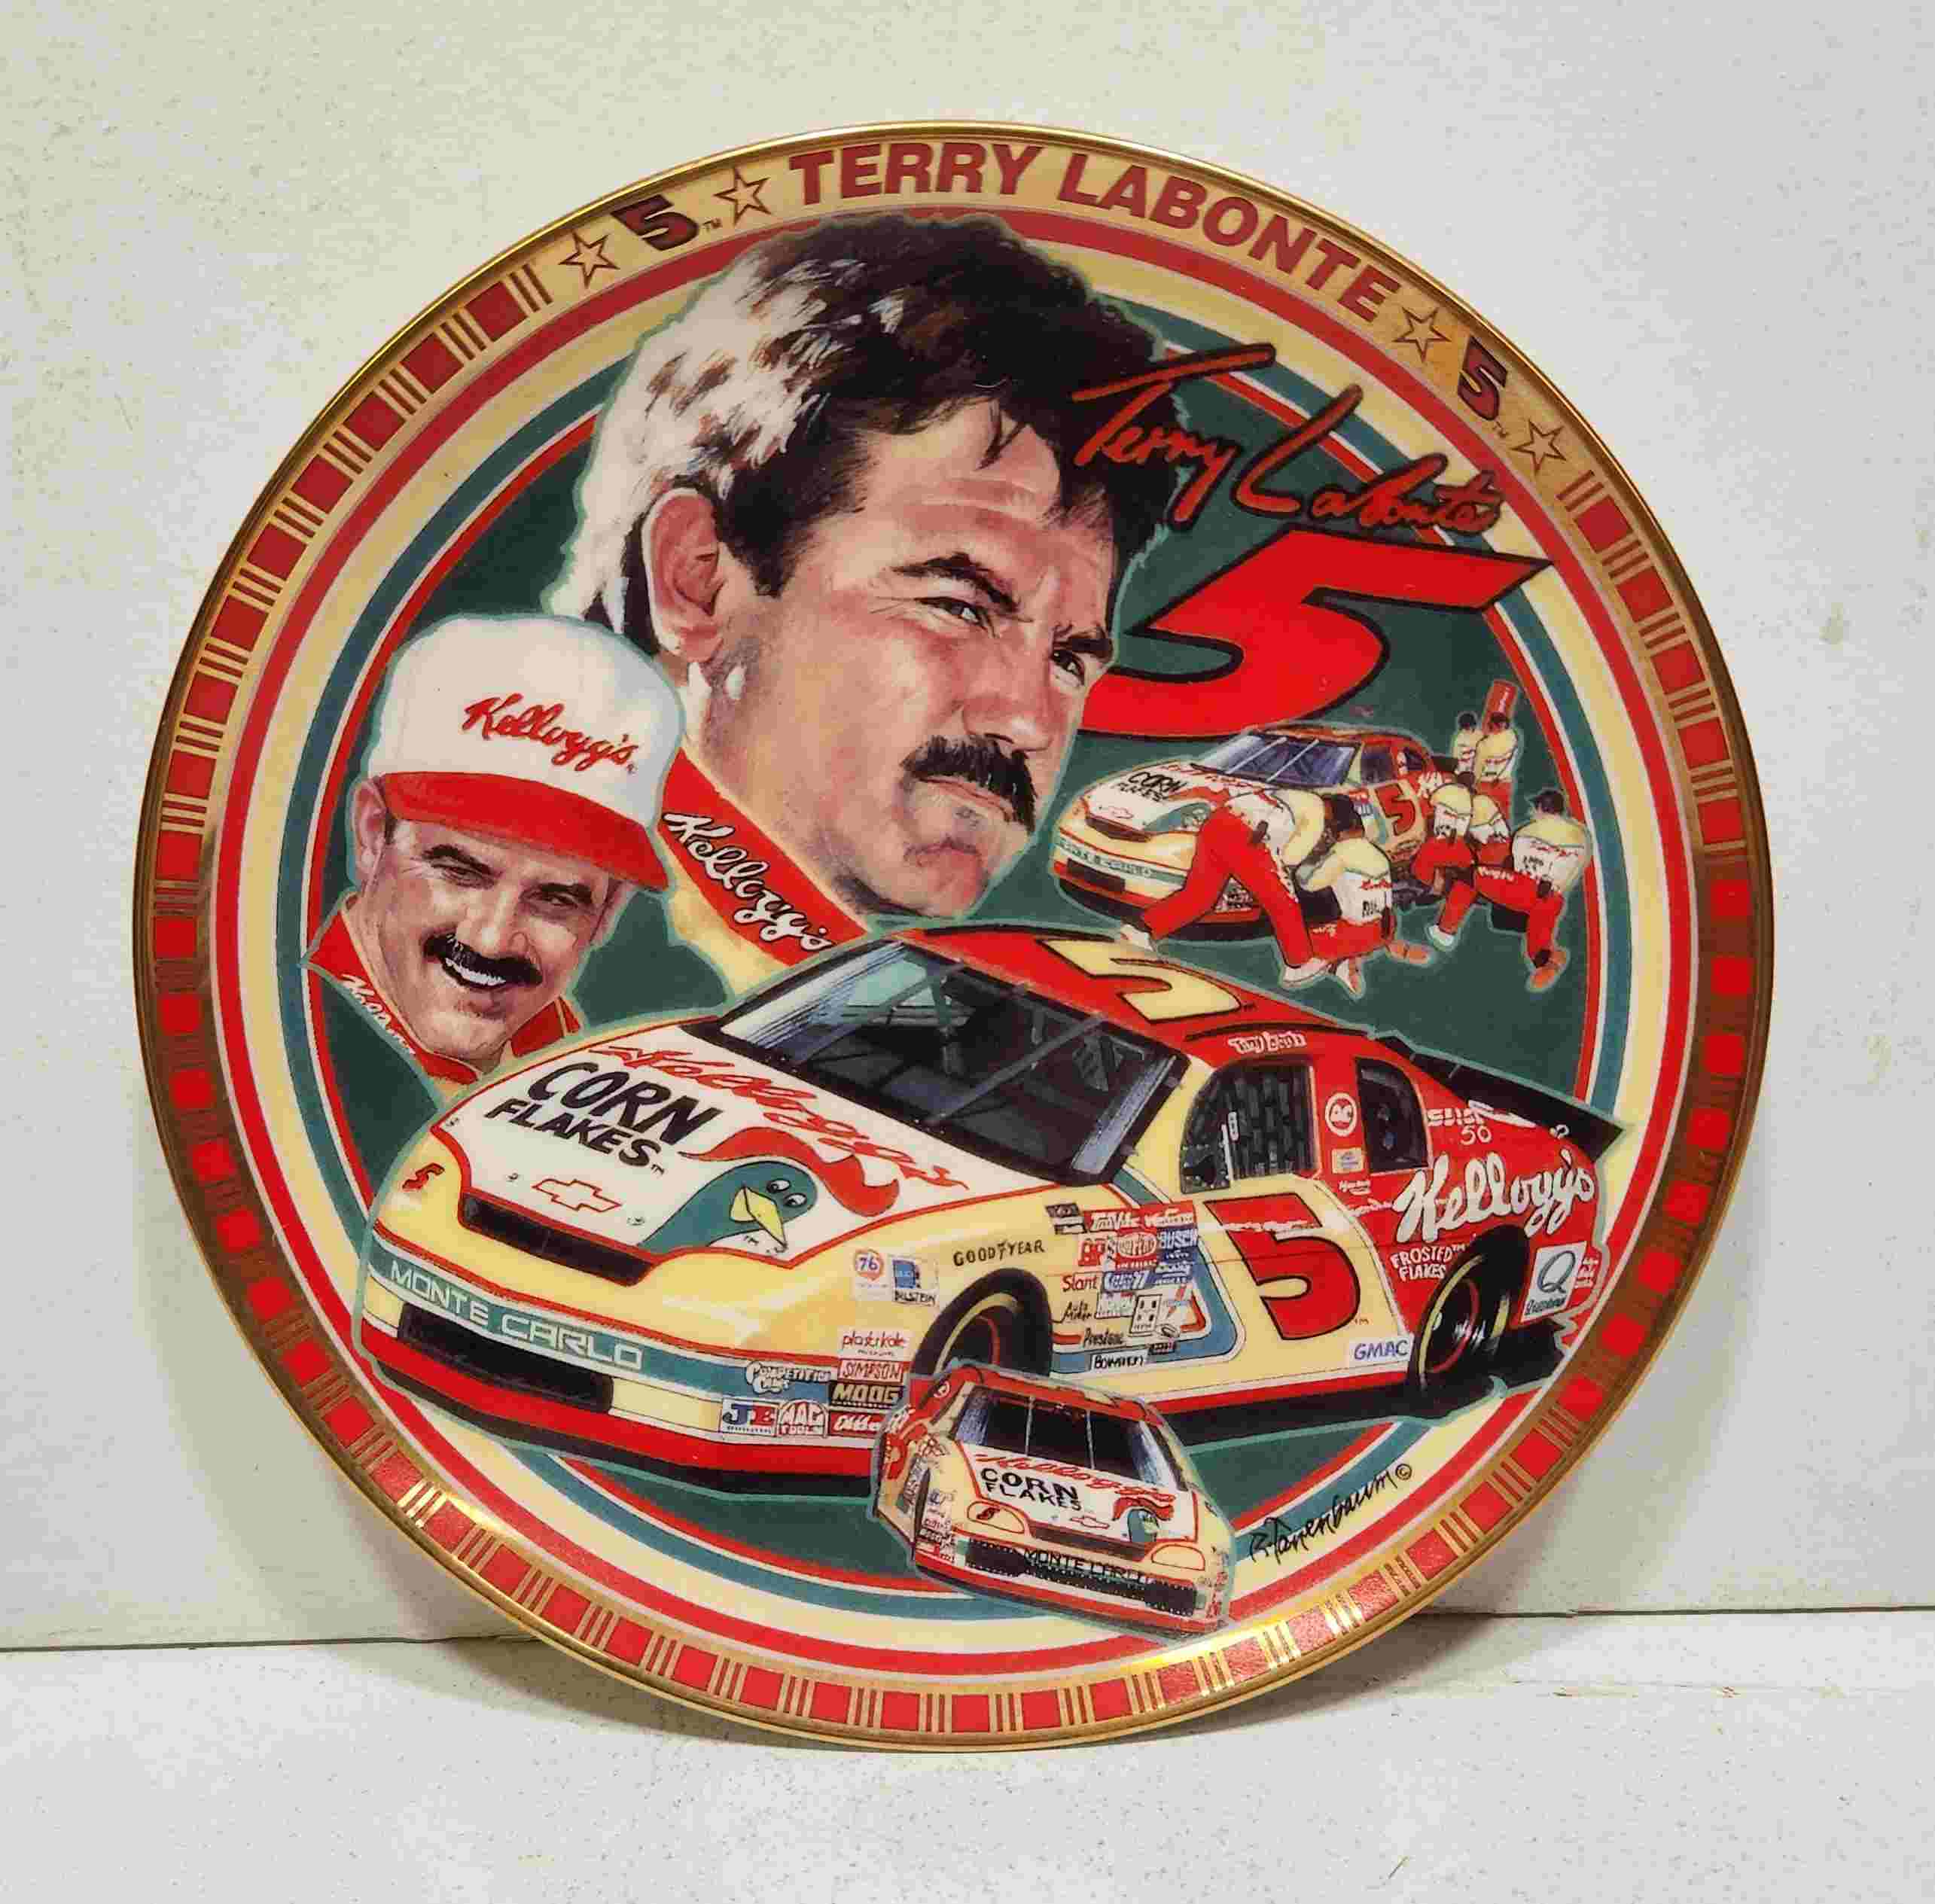 1996 Terry Labonte Drivers of Victory Lane by The Hamilton Collection